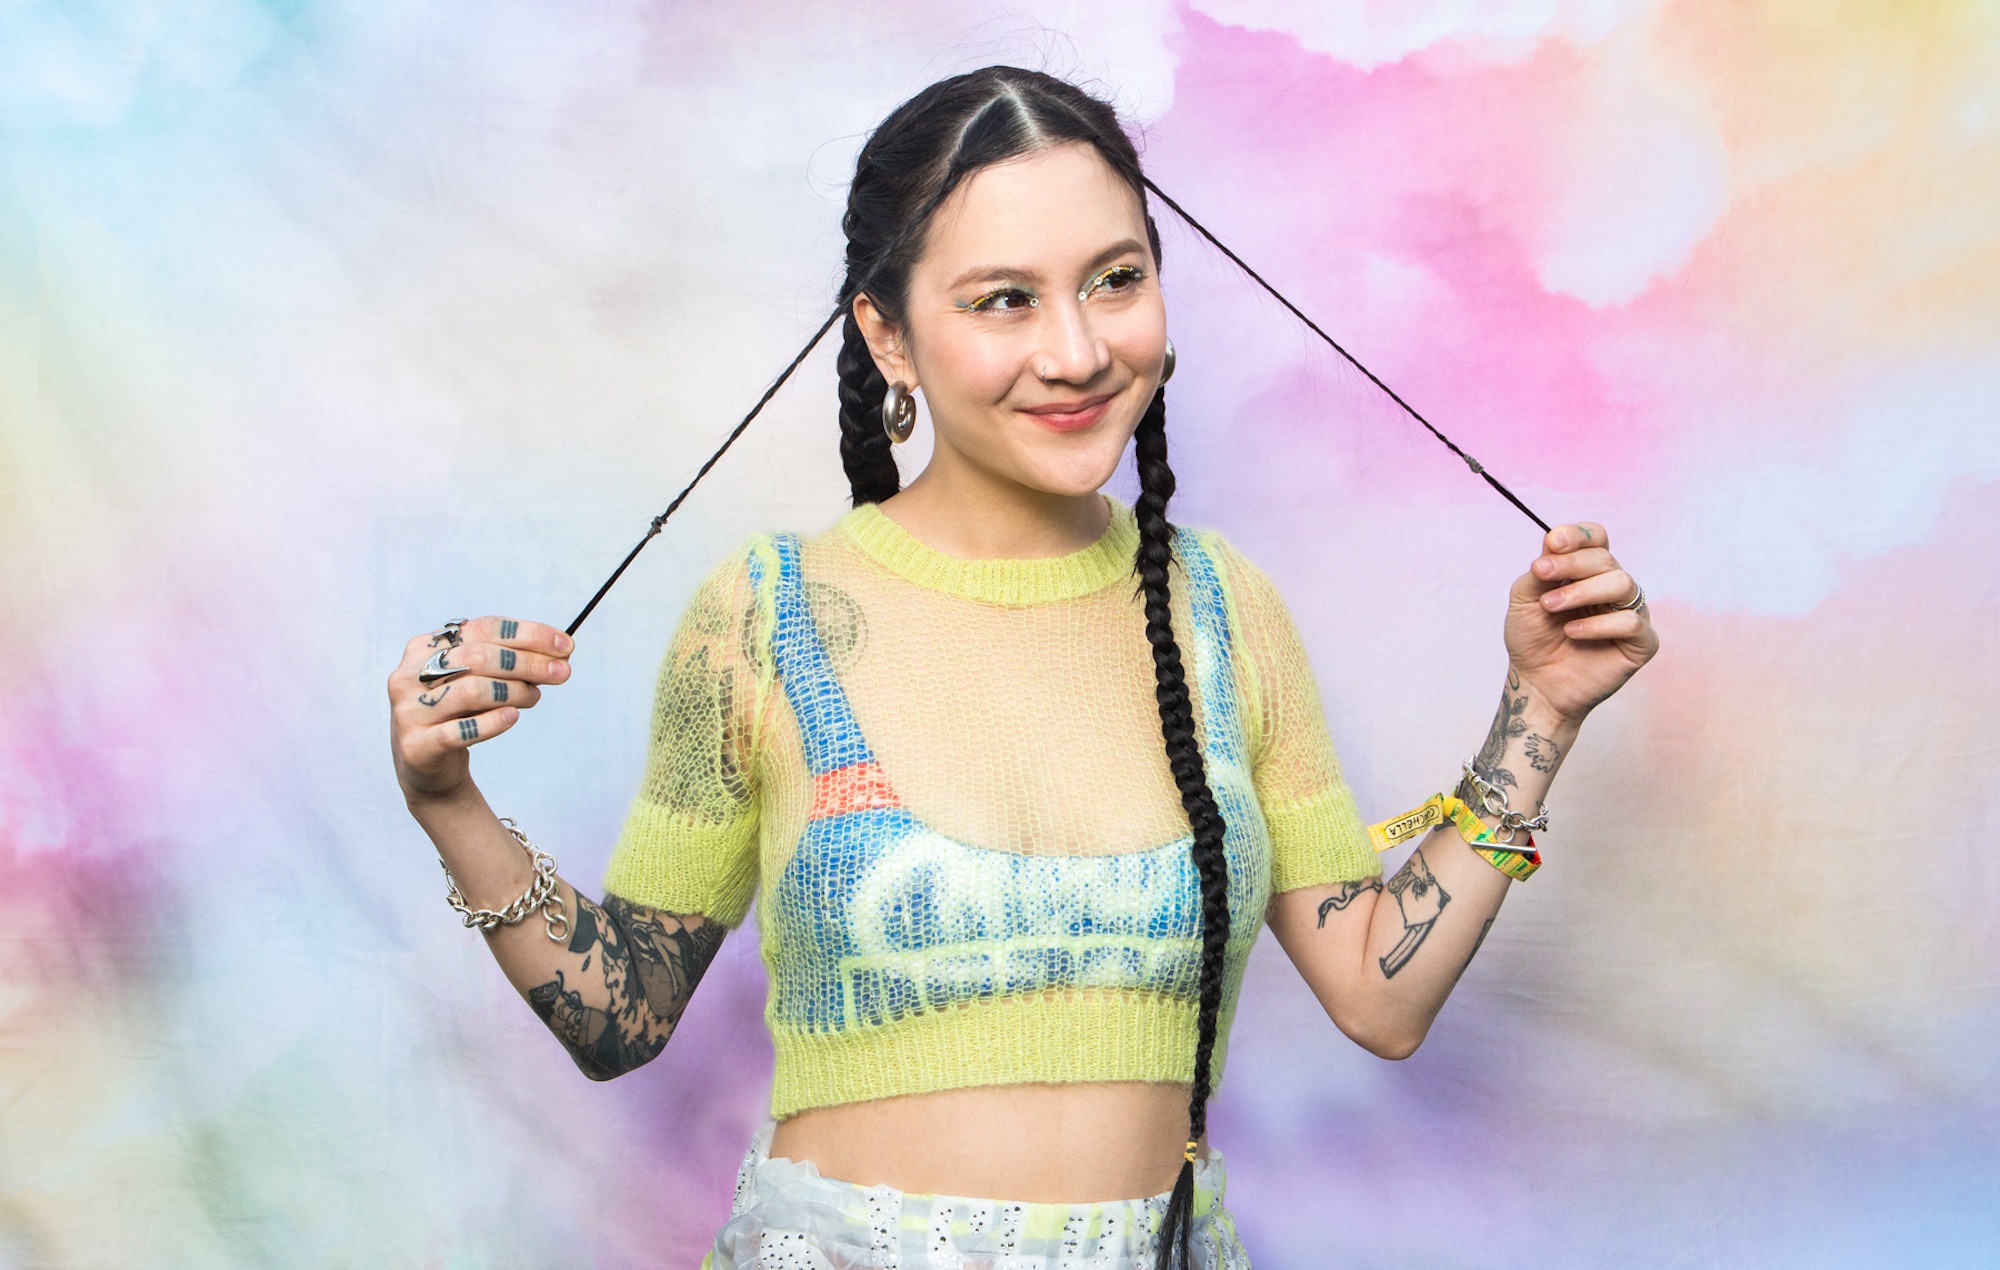 Japanese Breakfast: “This year is about enjoying myself – my number one job is to have fun”